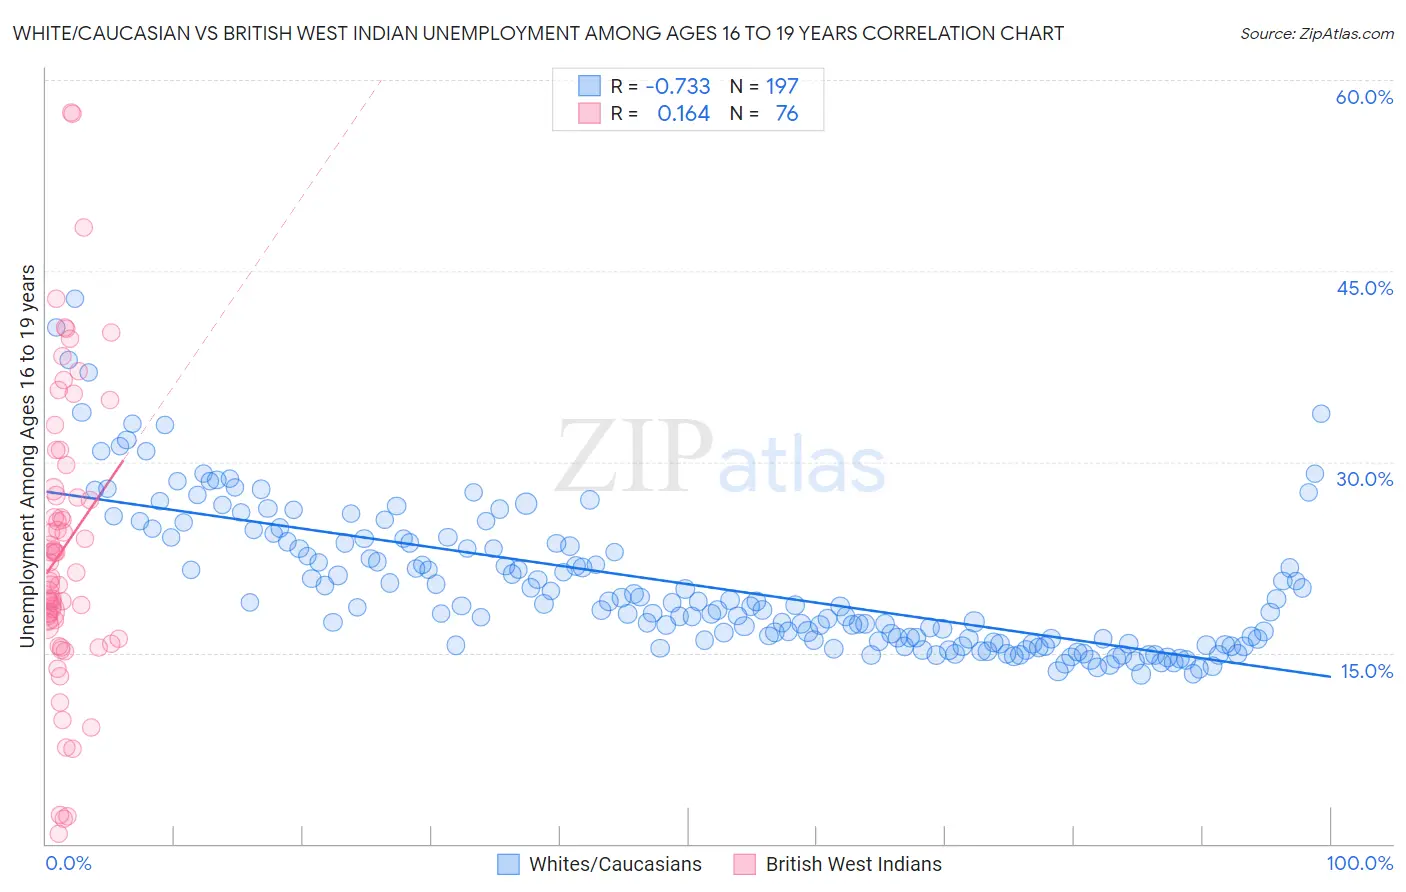 White/Caucasian vs British West Indian Unemployment Among Ages 16 to 19 years